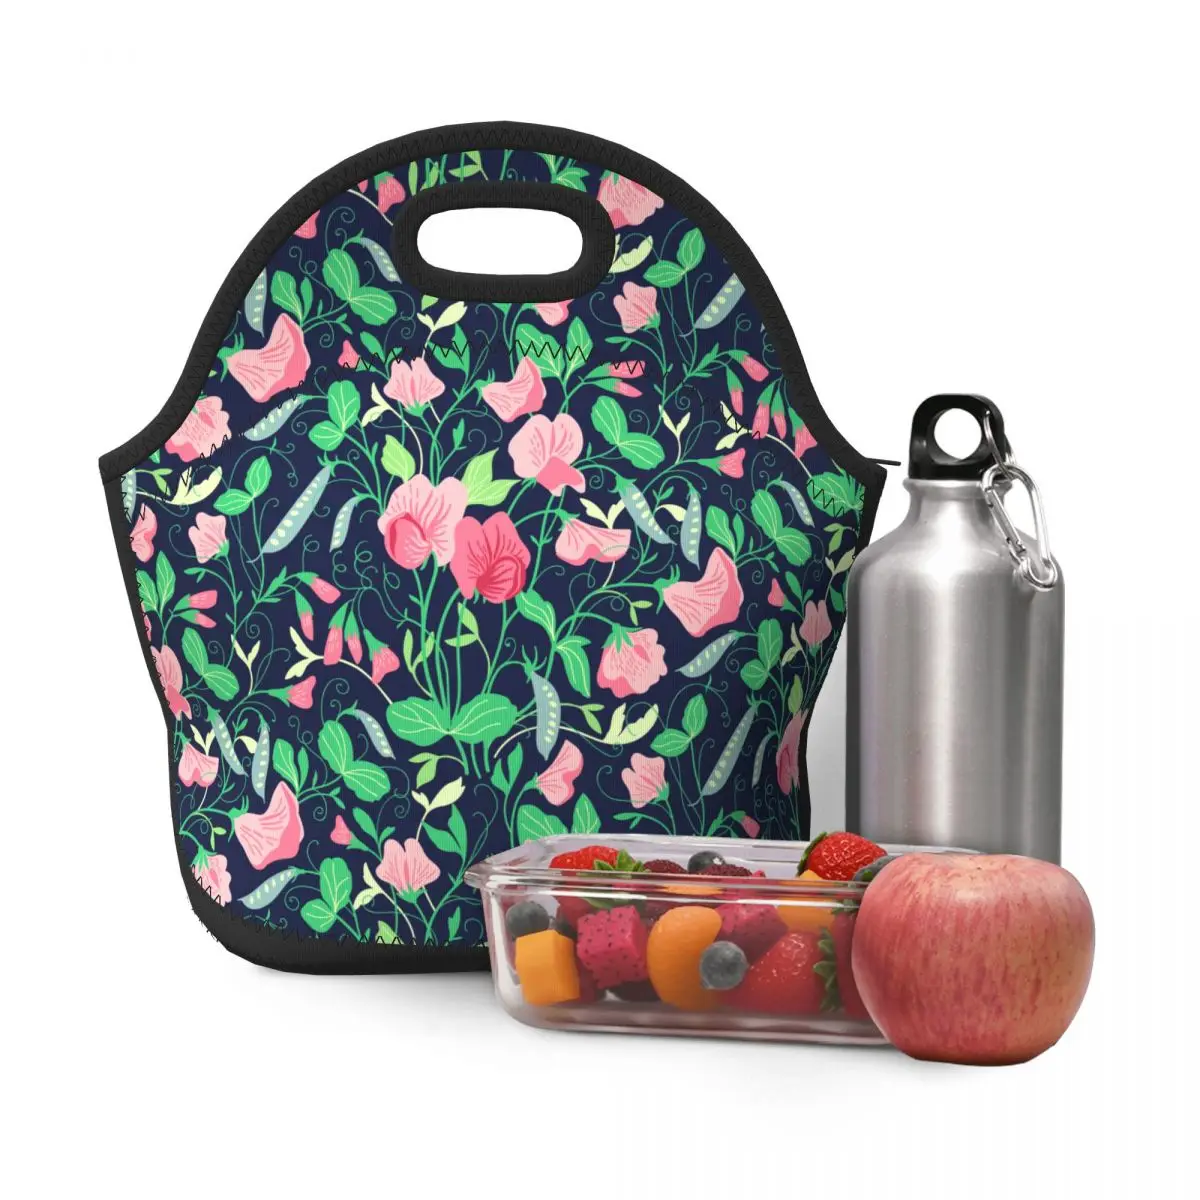 

Girls Floral Lunch Bags for School Women's Work Lunch Food Drink Organizer Pouch Bags Grocery Bag